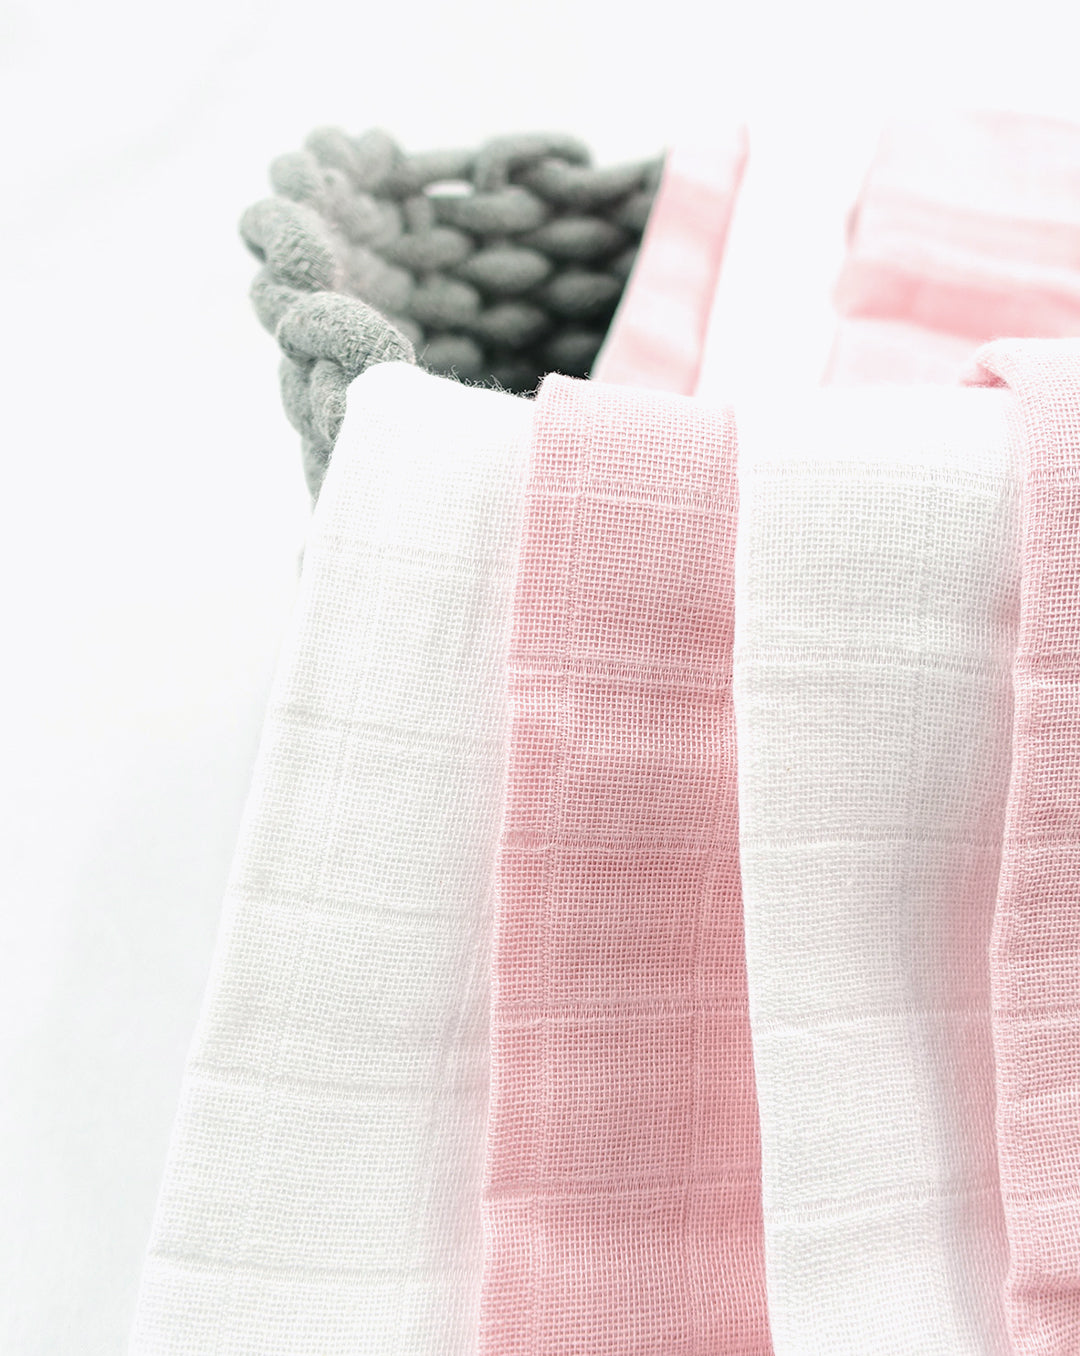 Muslin squares - Pale Pink & White 4 Pack